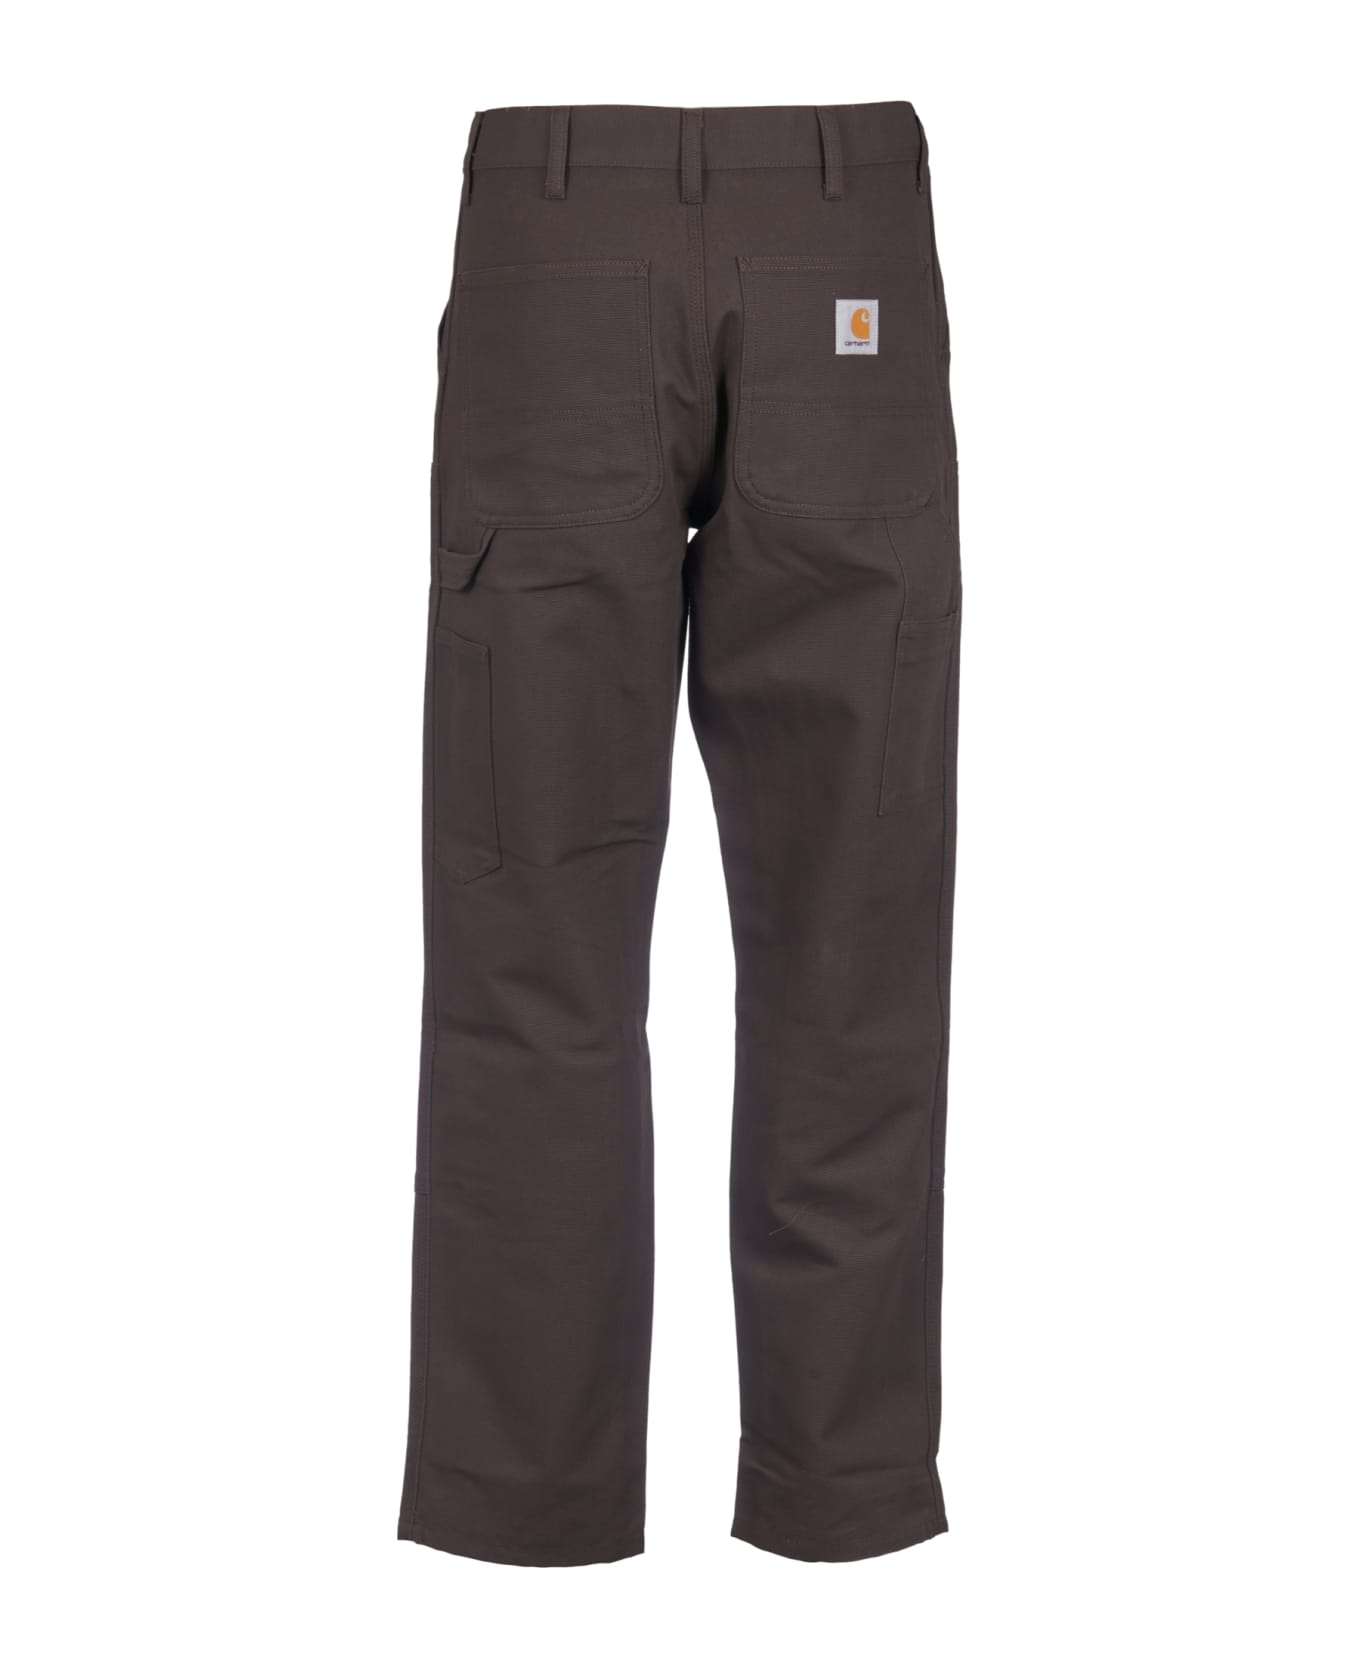 Carhartt Straight Buttoned Trousers - Tobacco